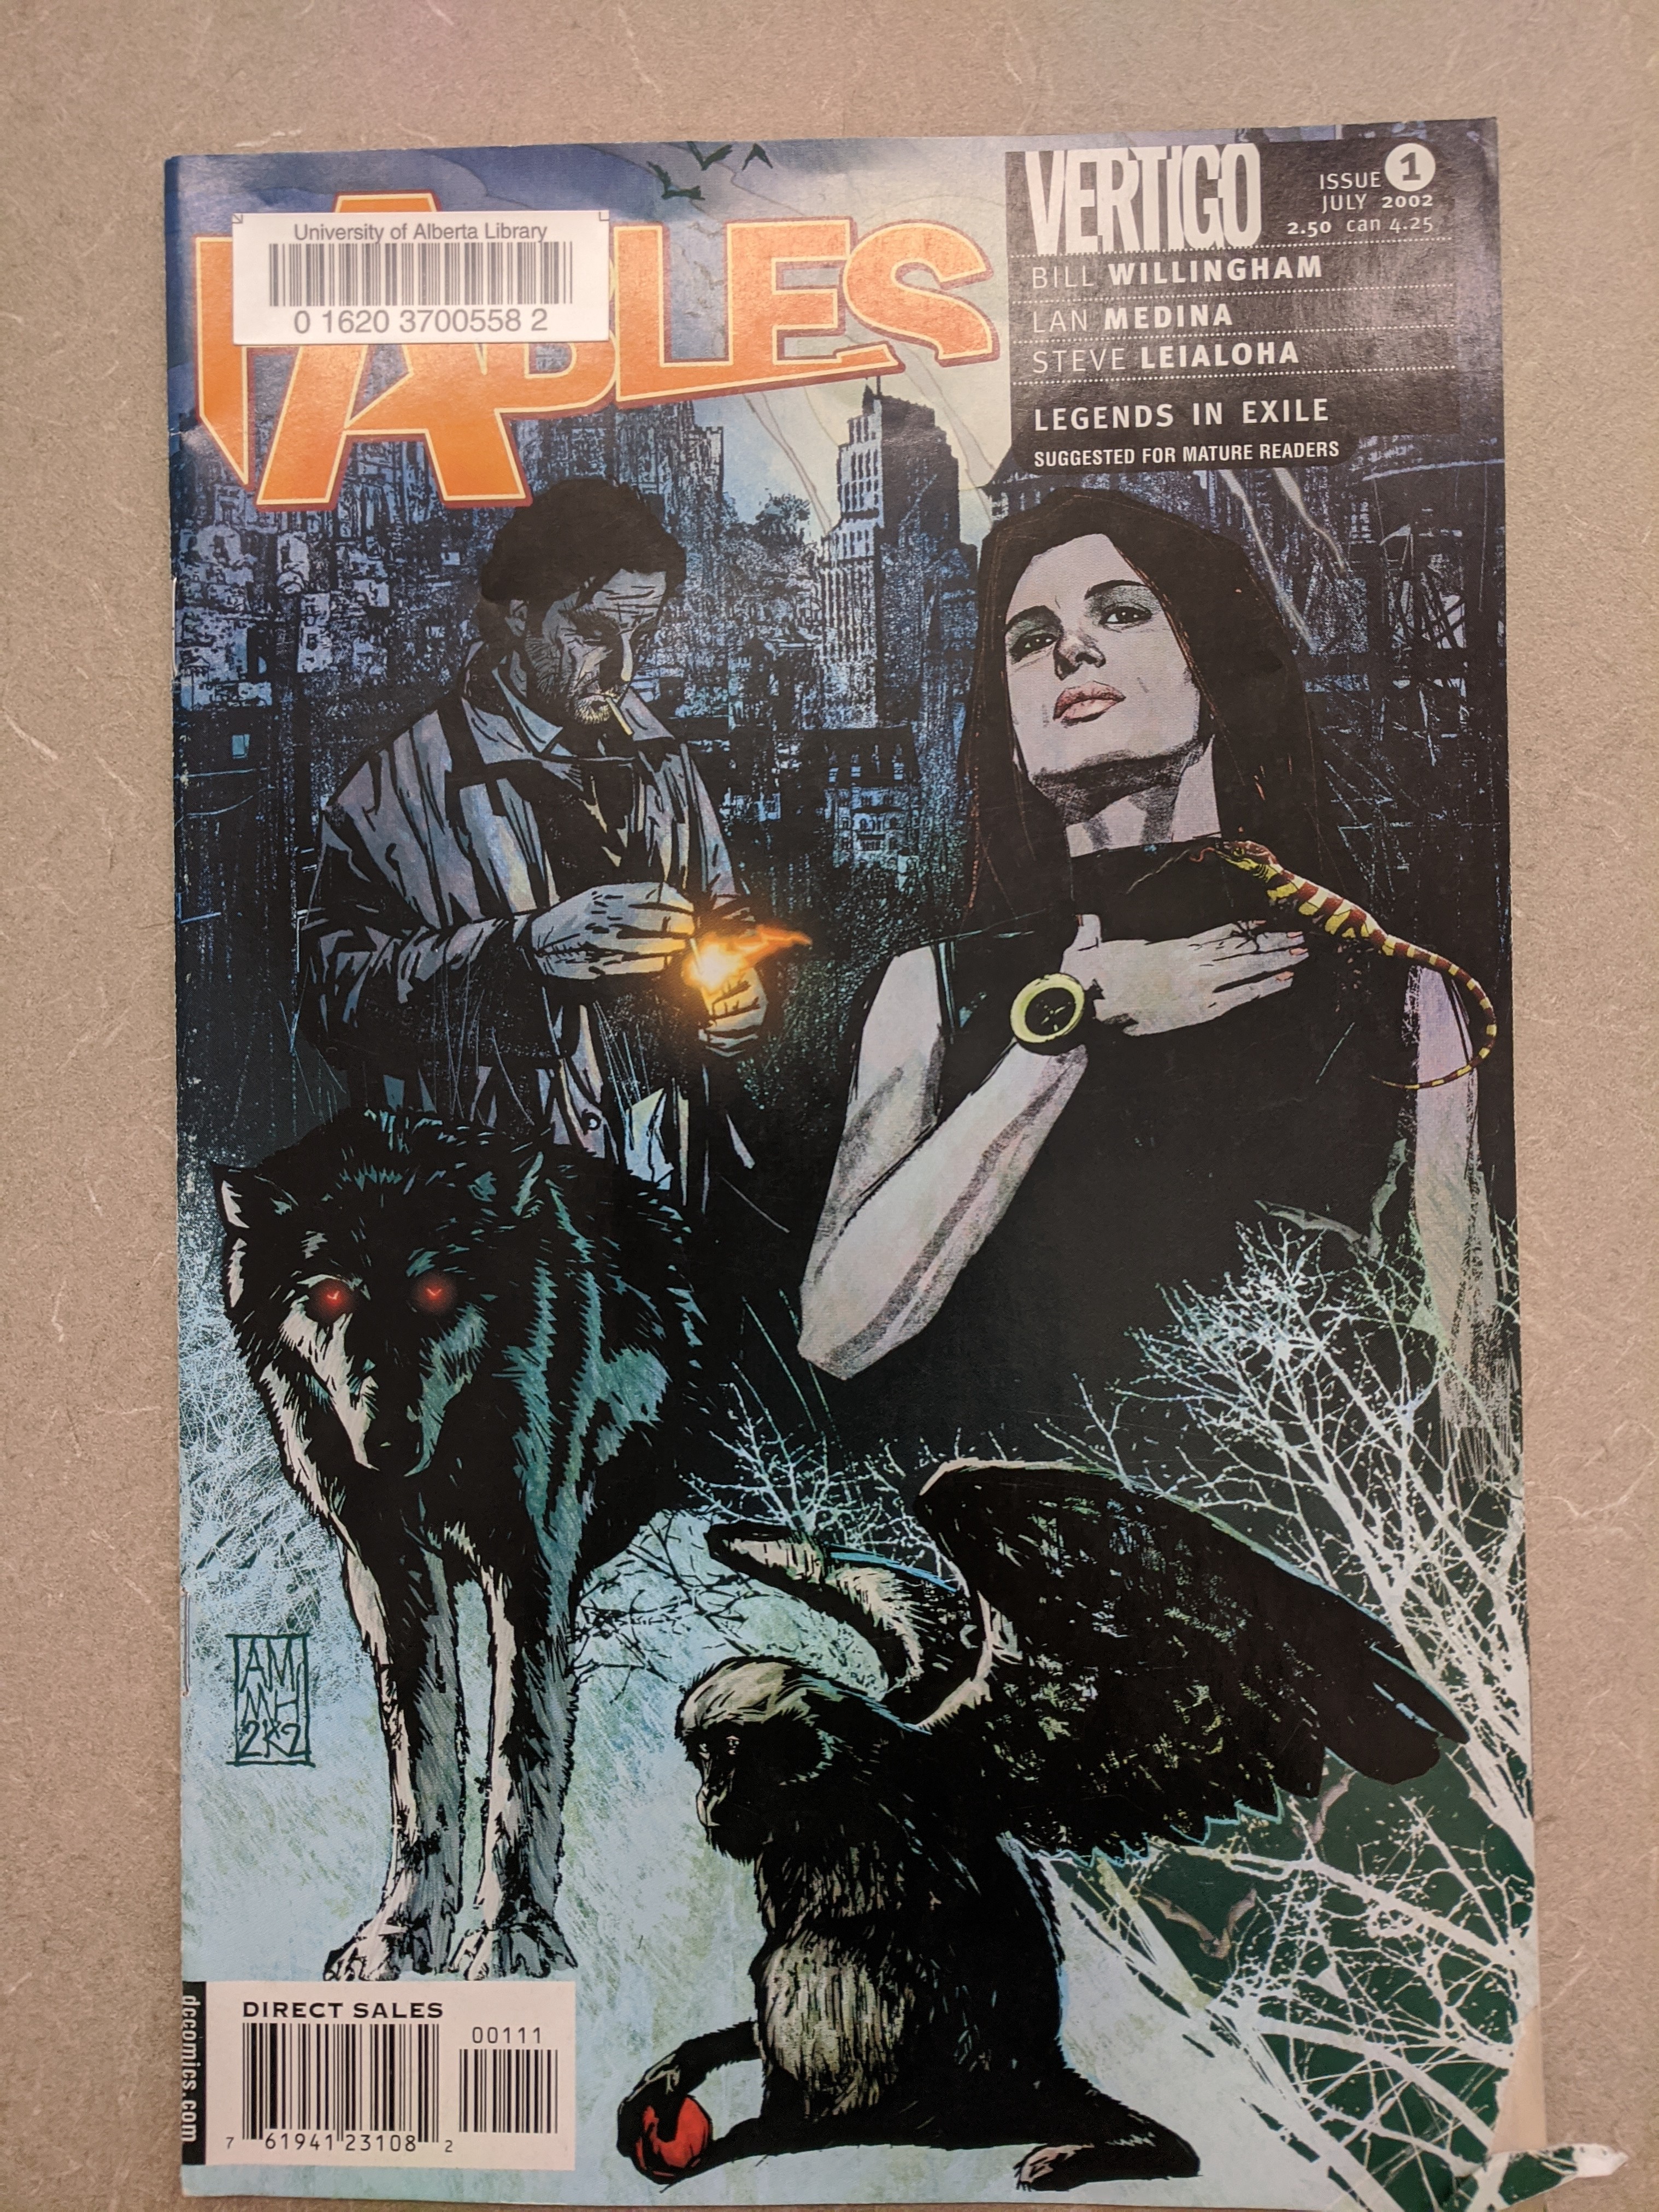 cover of the comic book "Fables"